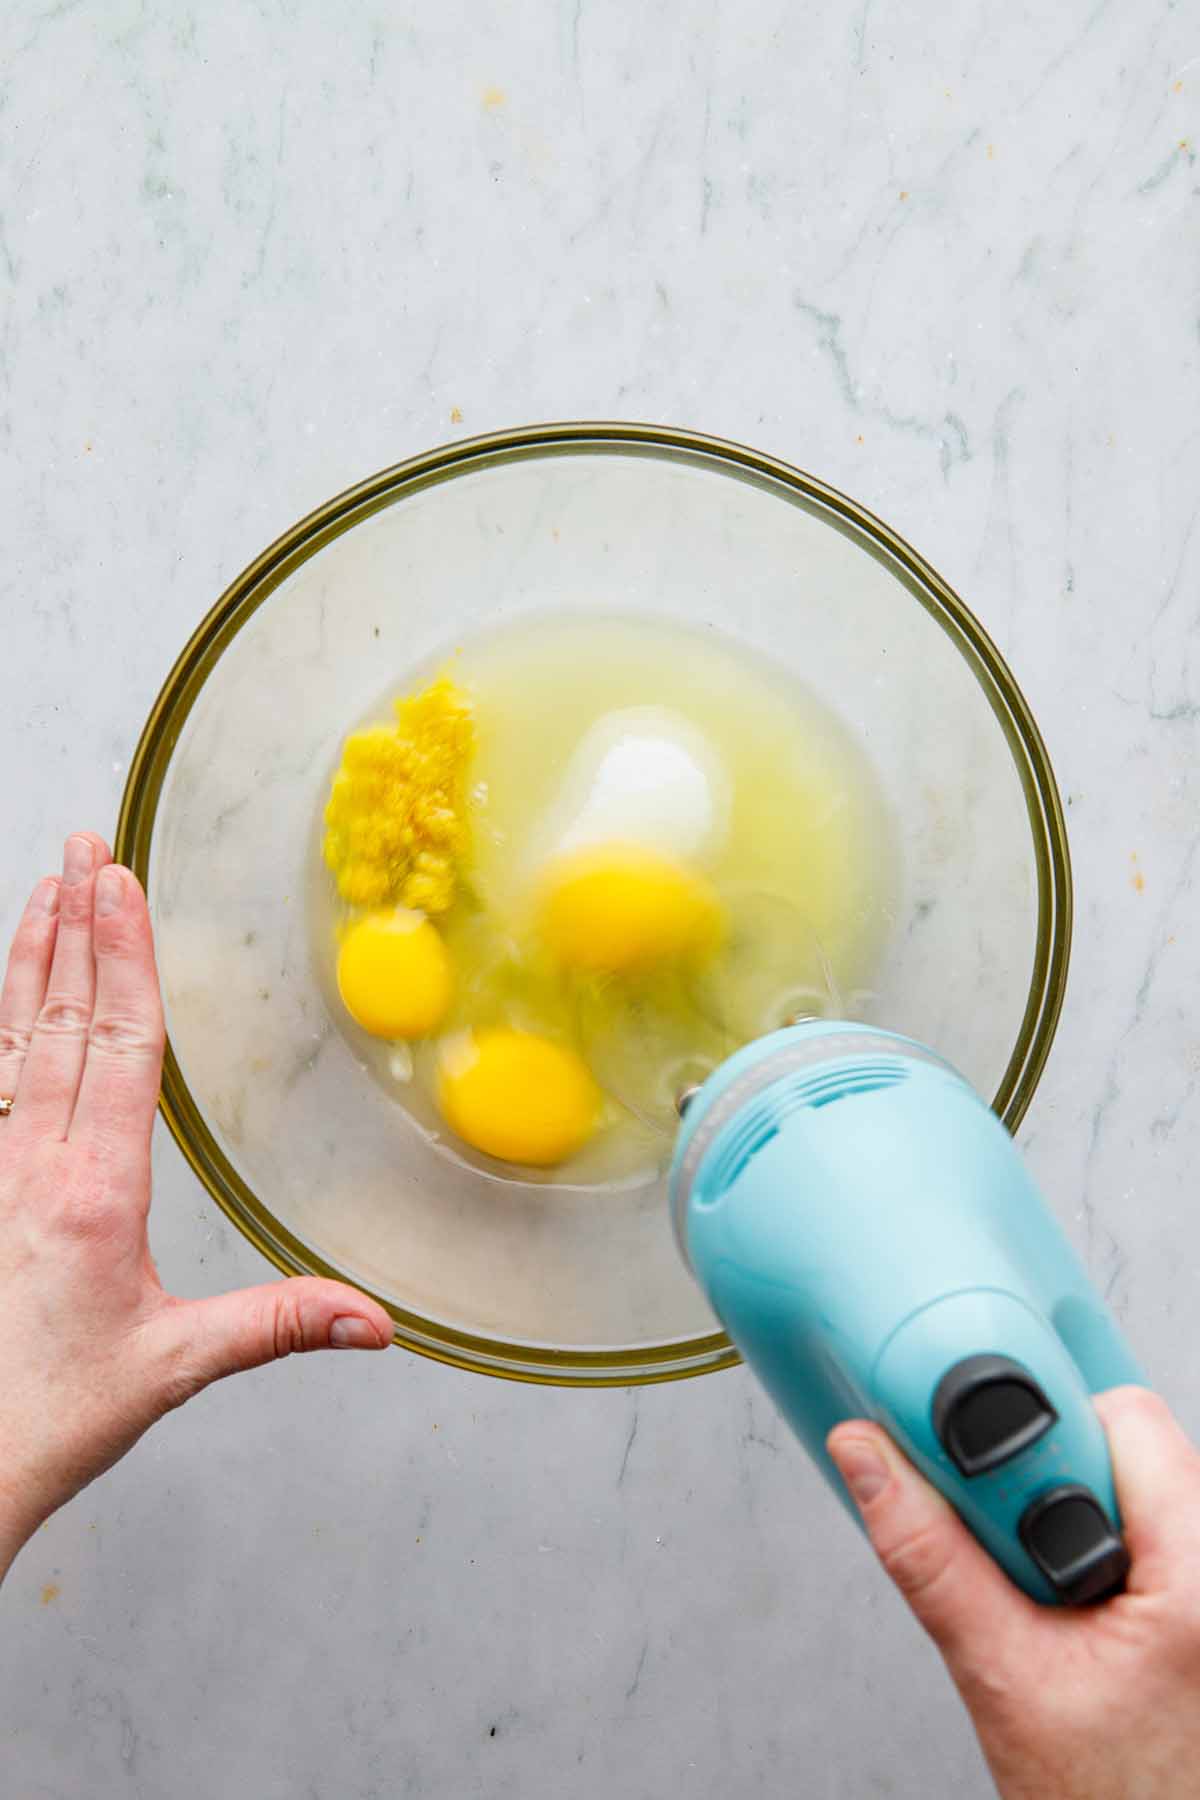 A hand using a hand mixer to whisk eggs, lemon zest, lemon juice, and sugar in a large glass bowl.